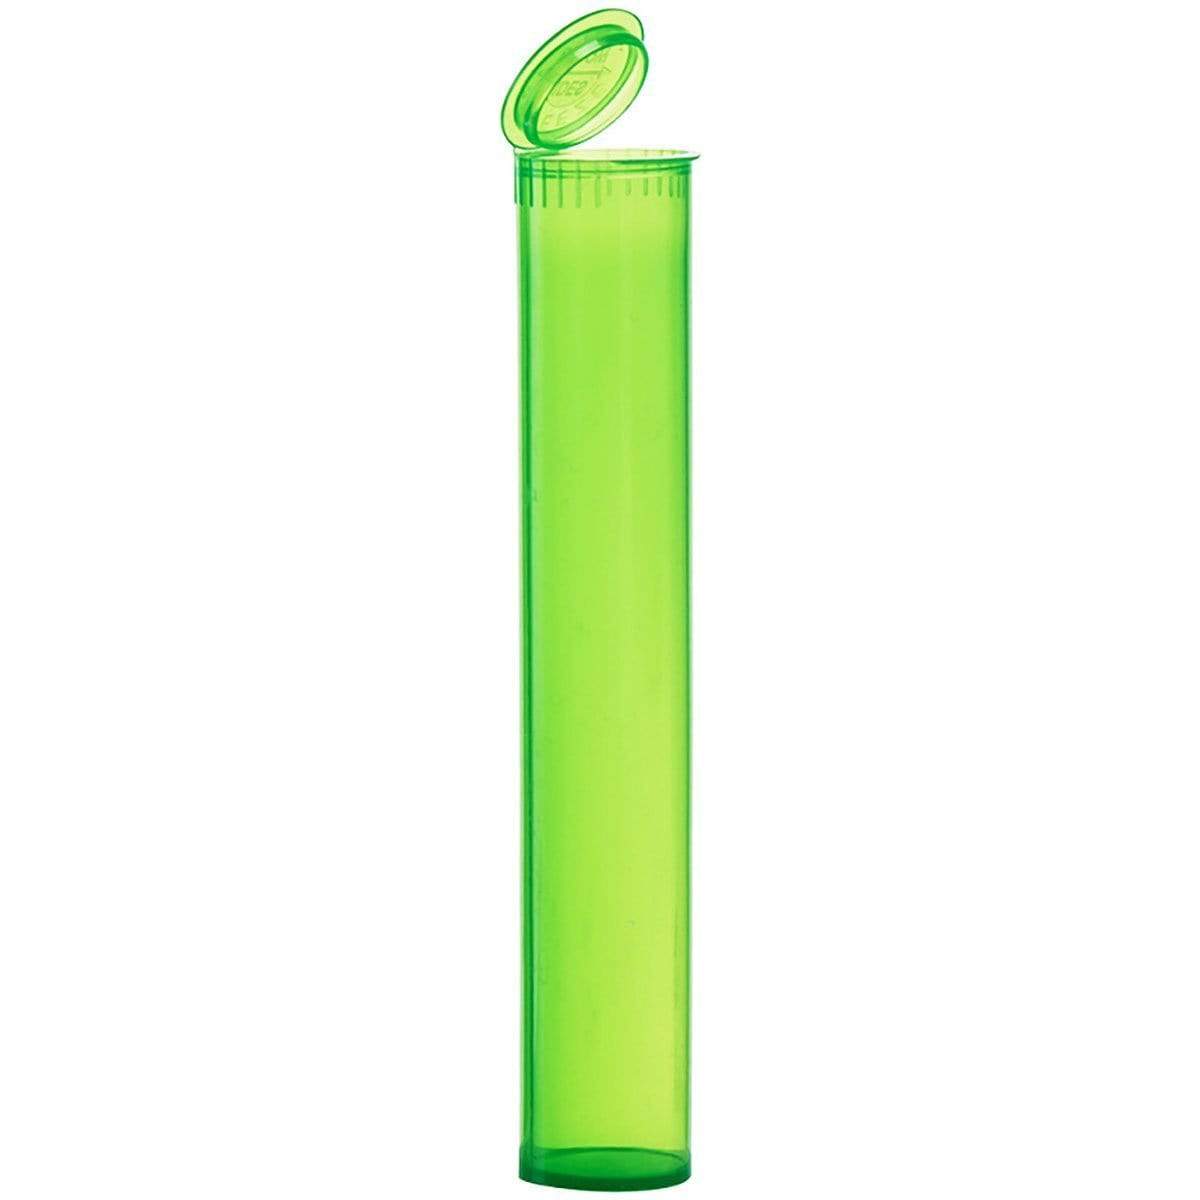 Translucent Green Translucent Squeeze Top Child-Resistant Pre-Roll Tube | 116 mm